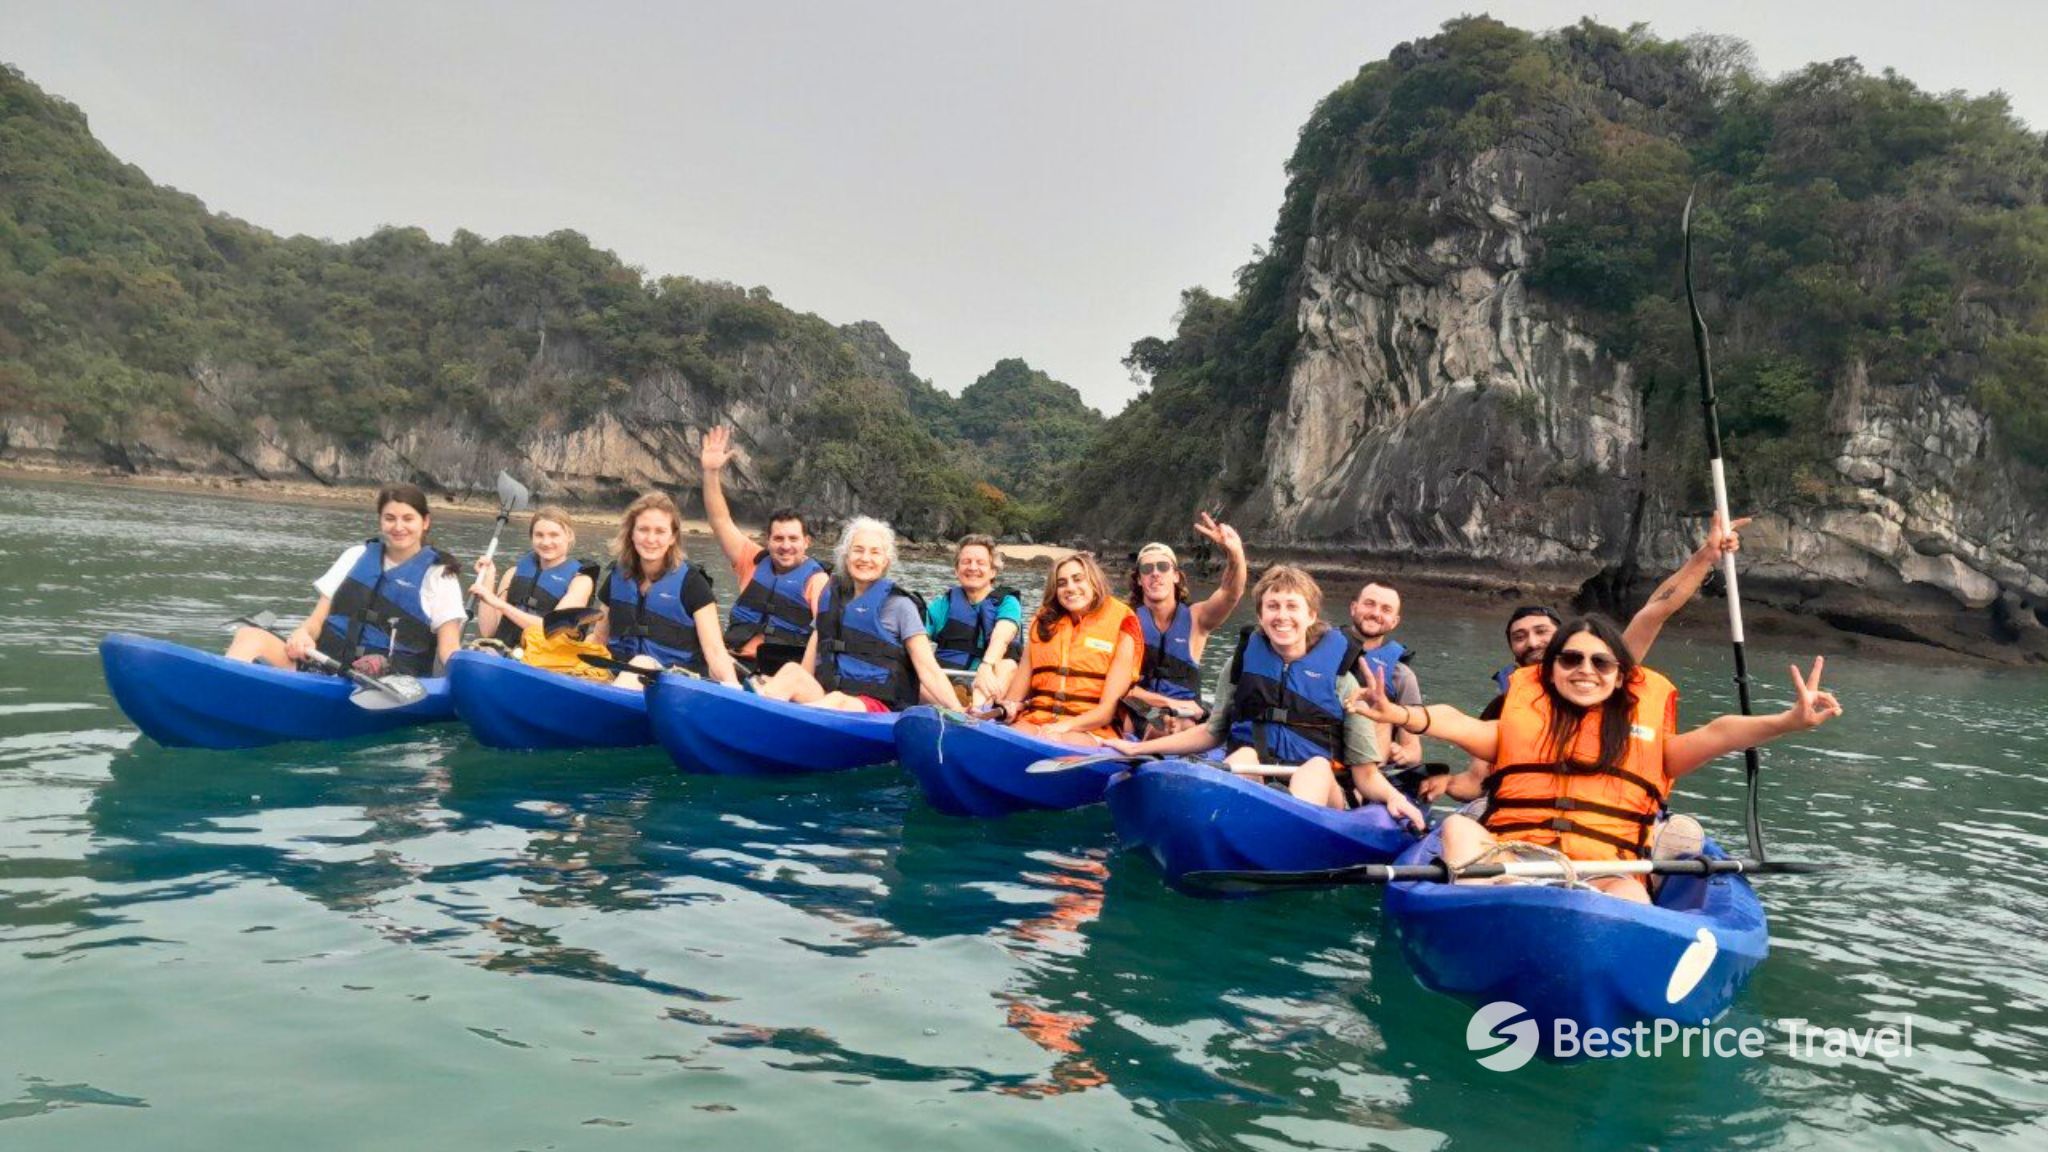 Day 4 Explore The Stunning Halong Bay By Kayak Trip